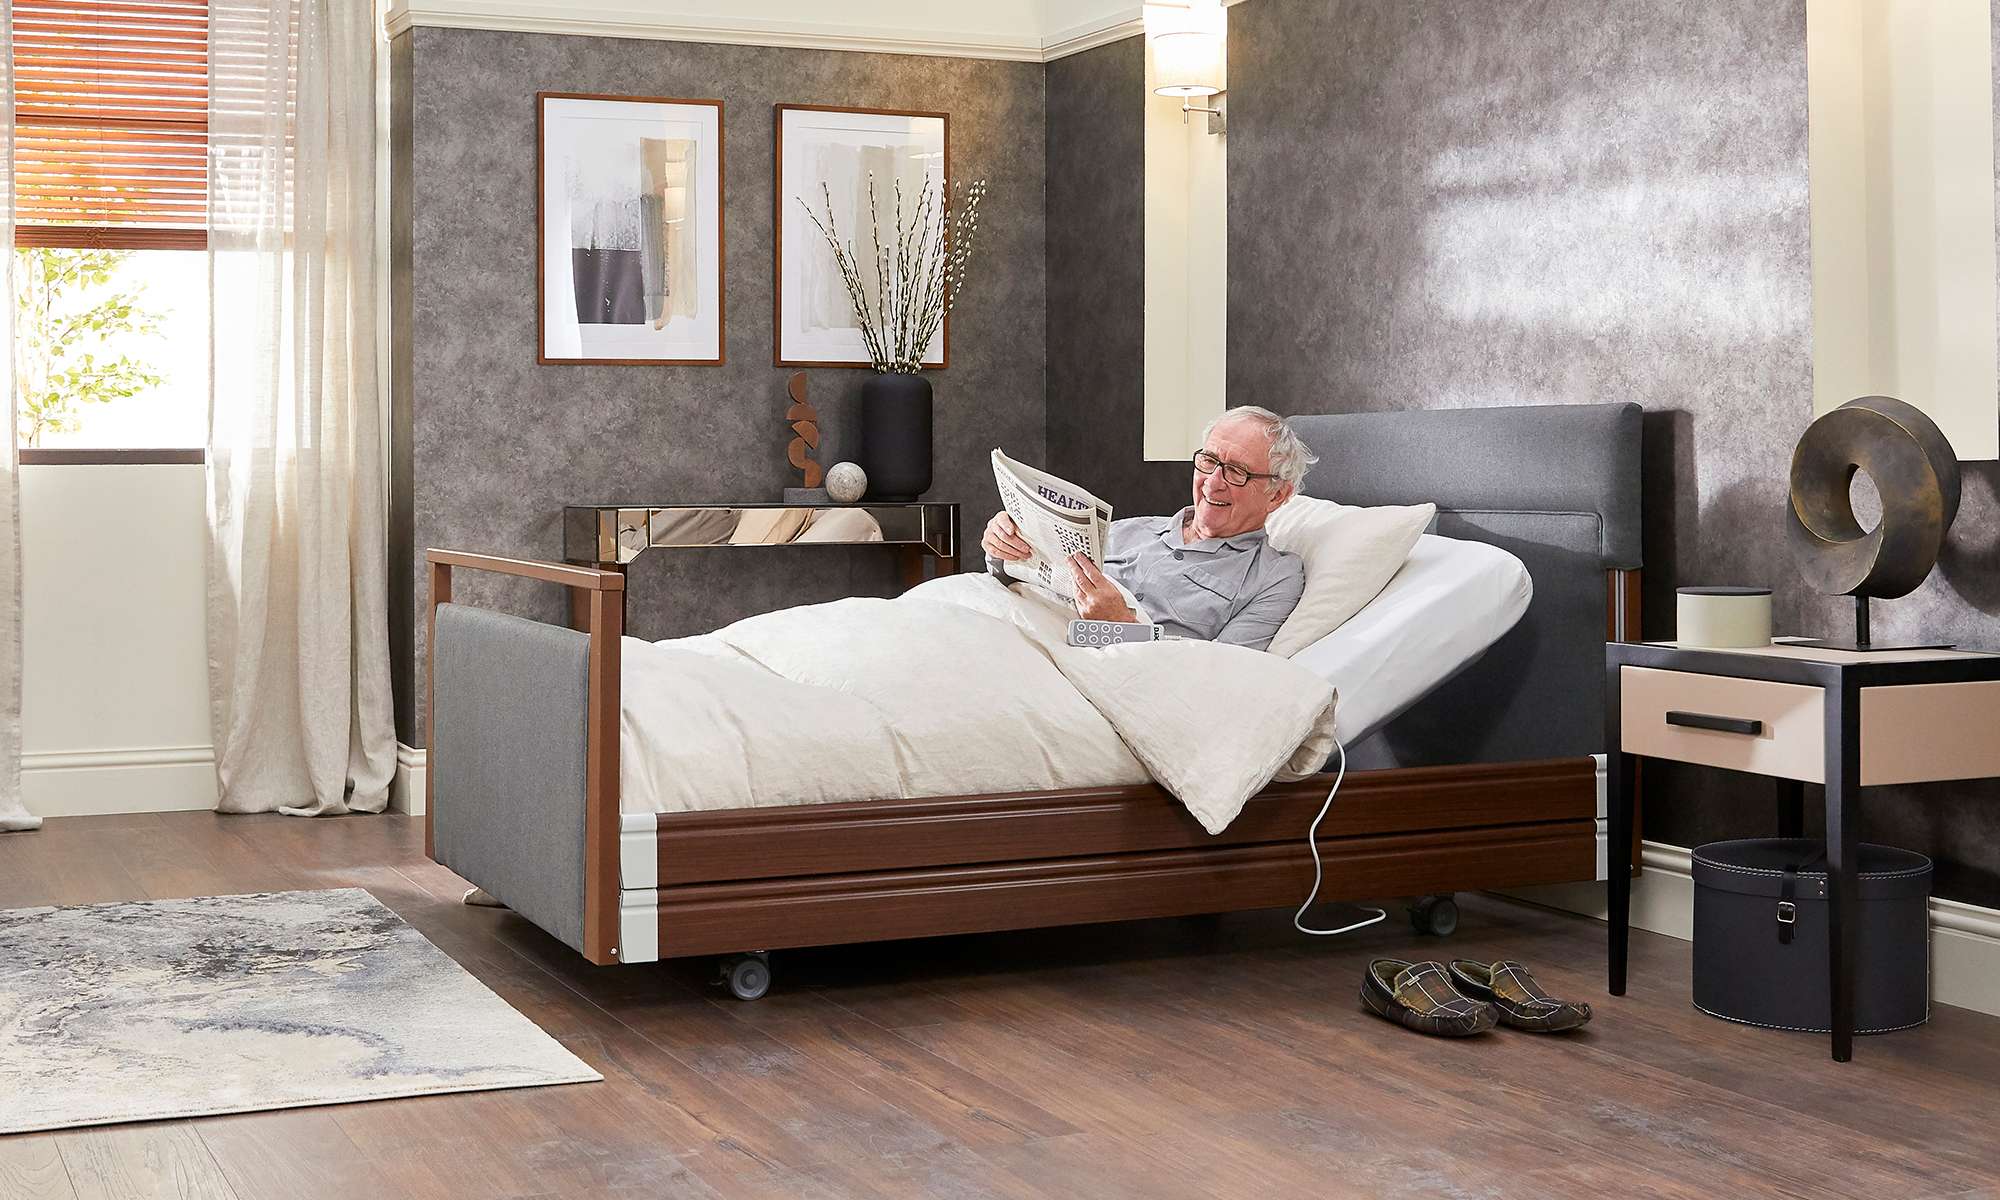 Elderly man on an electric recliner patient bed reading a newspaper.